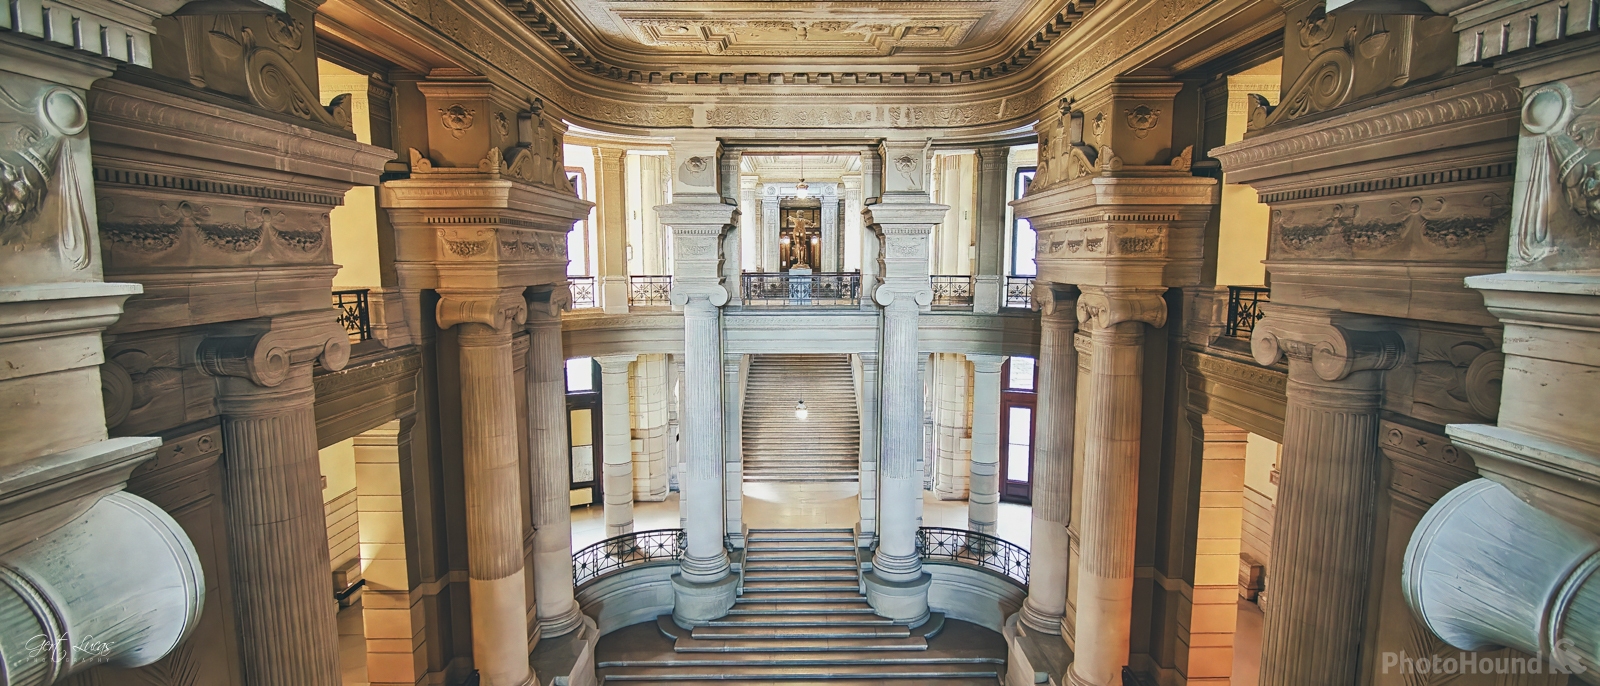 Image of Brussels Courthouse Interior by Gert Lucas